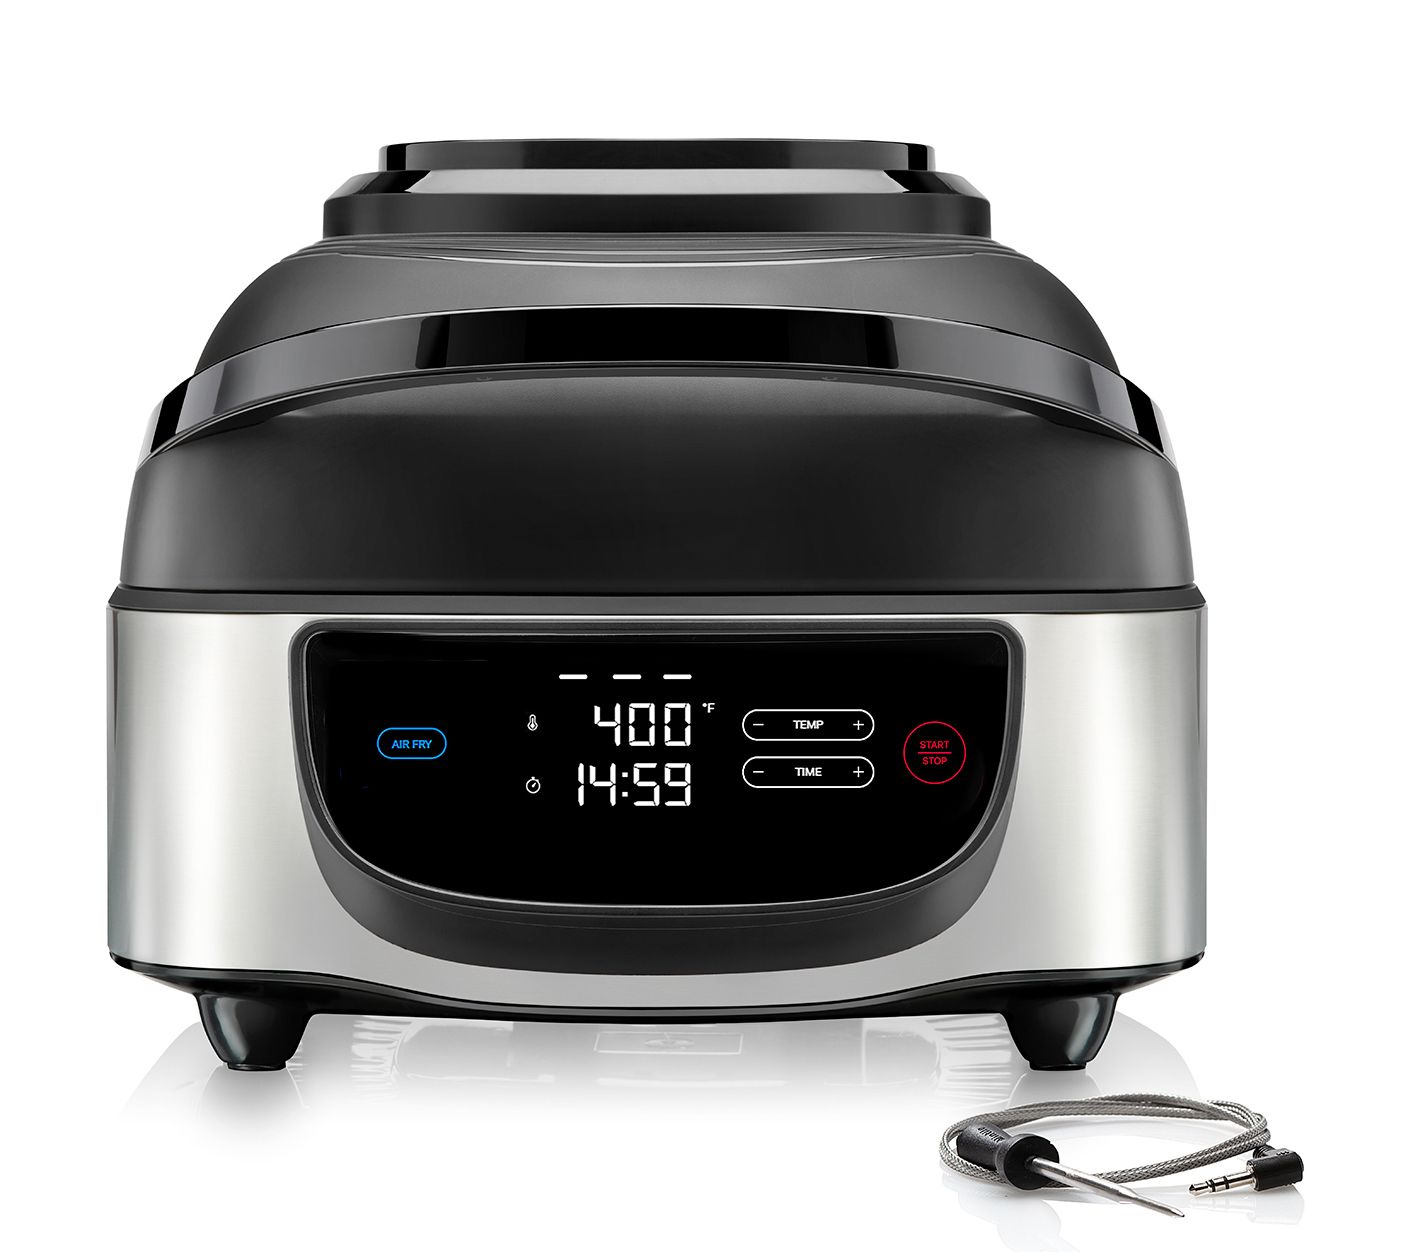 Ninja AG301 Foodi 5-in-1 Indoor Electric Grill with Air Fry, Roast, Bake &  Dehydrate - Programmable, Black/Silver